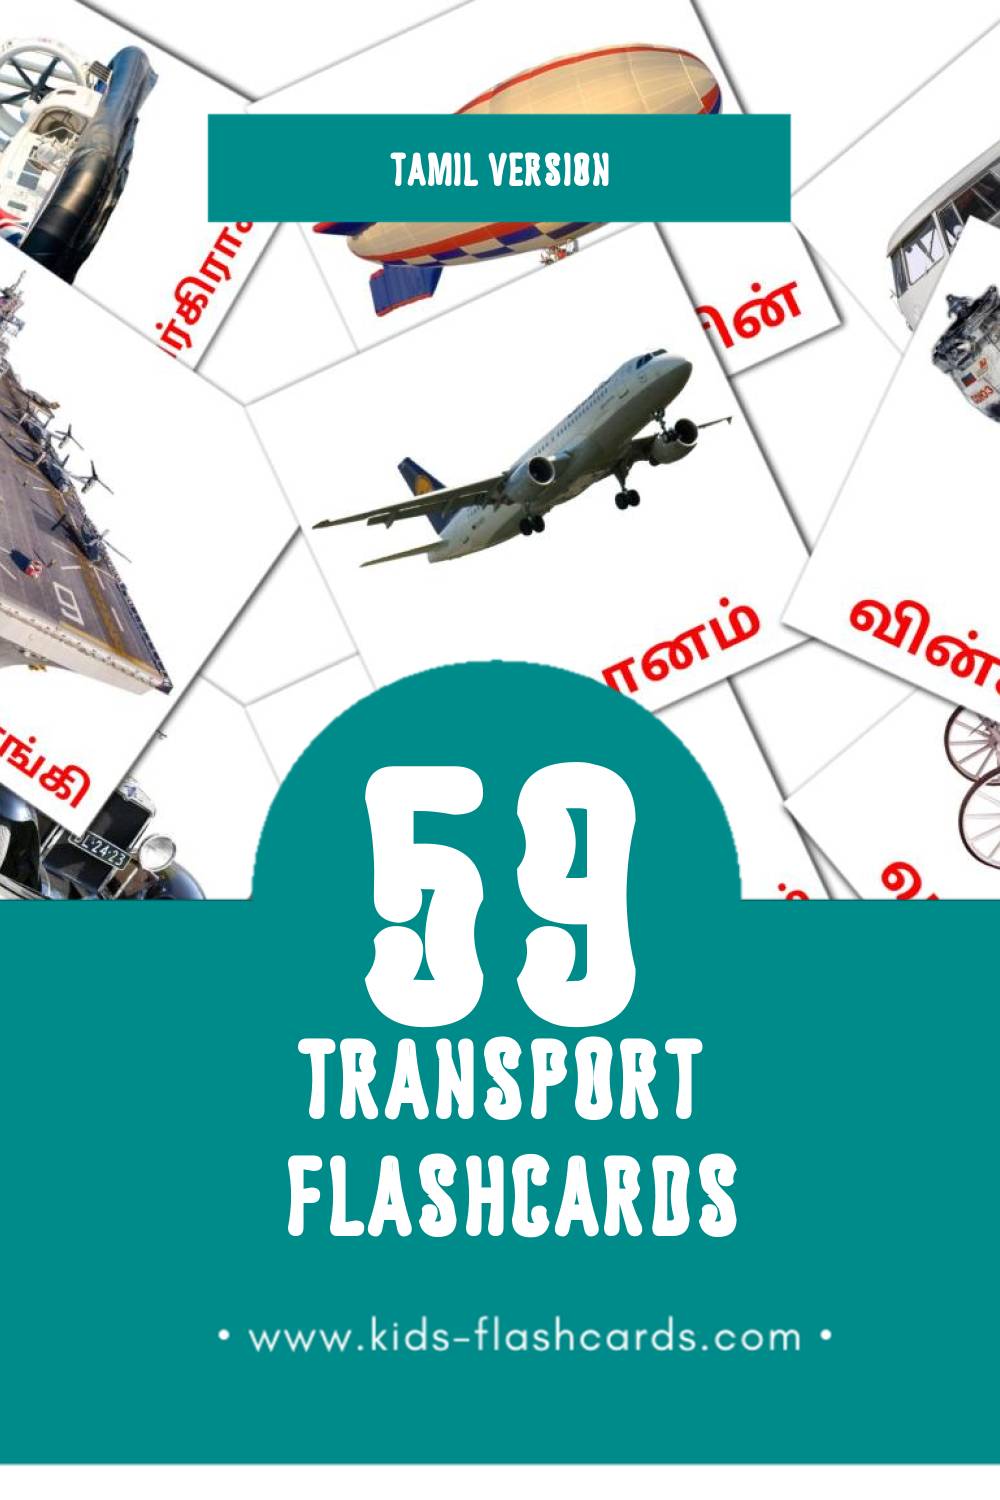 Visual போக்குவரத்து Flashcards for Toddlers (46 cards in Tamil)